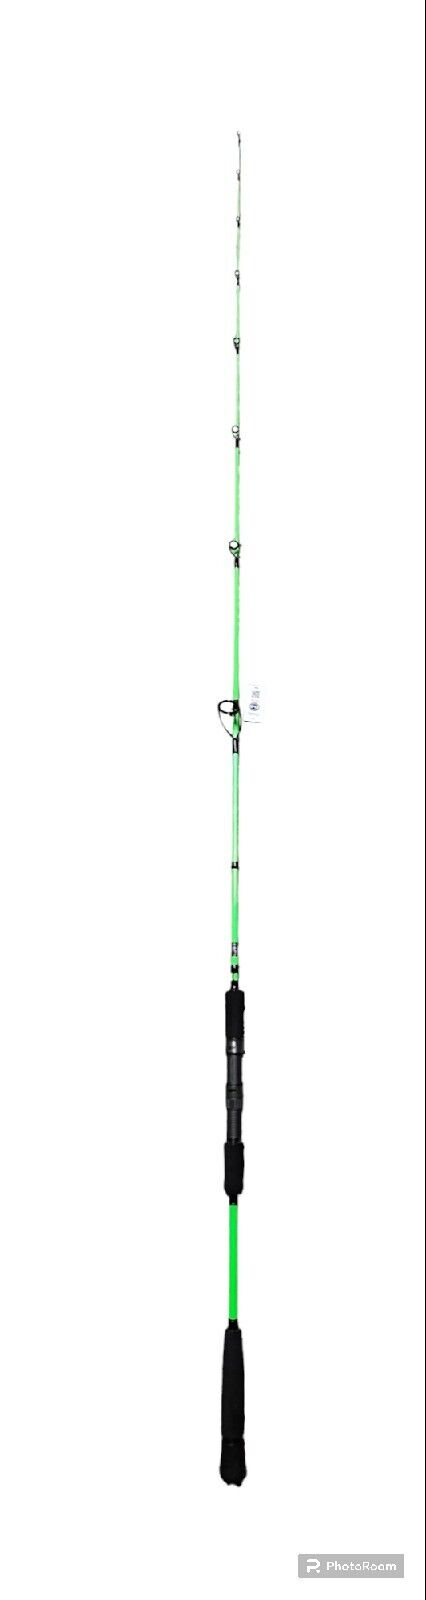 M3Tackle Carbon Drag-On Inshore Spinning Rod M3D701-MLF 7 17